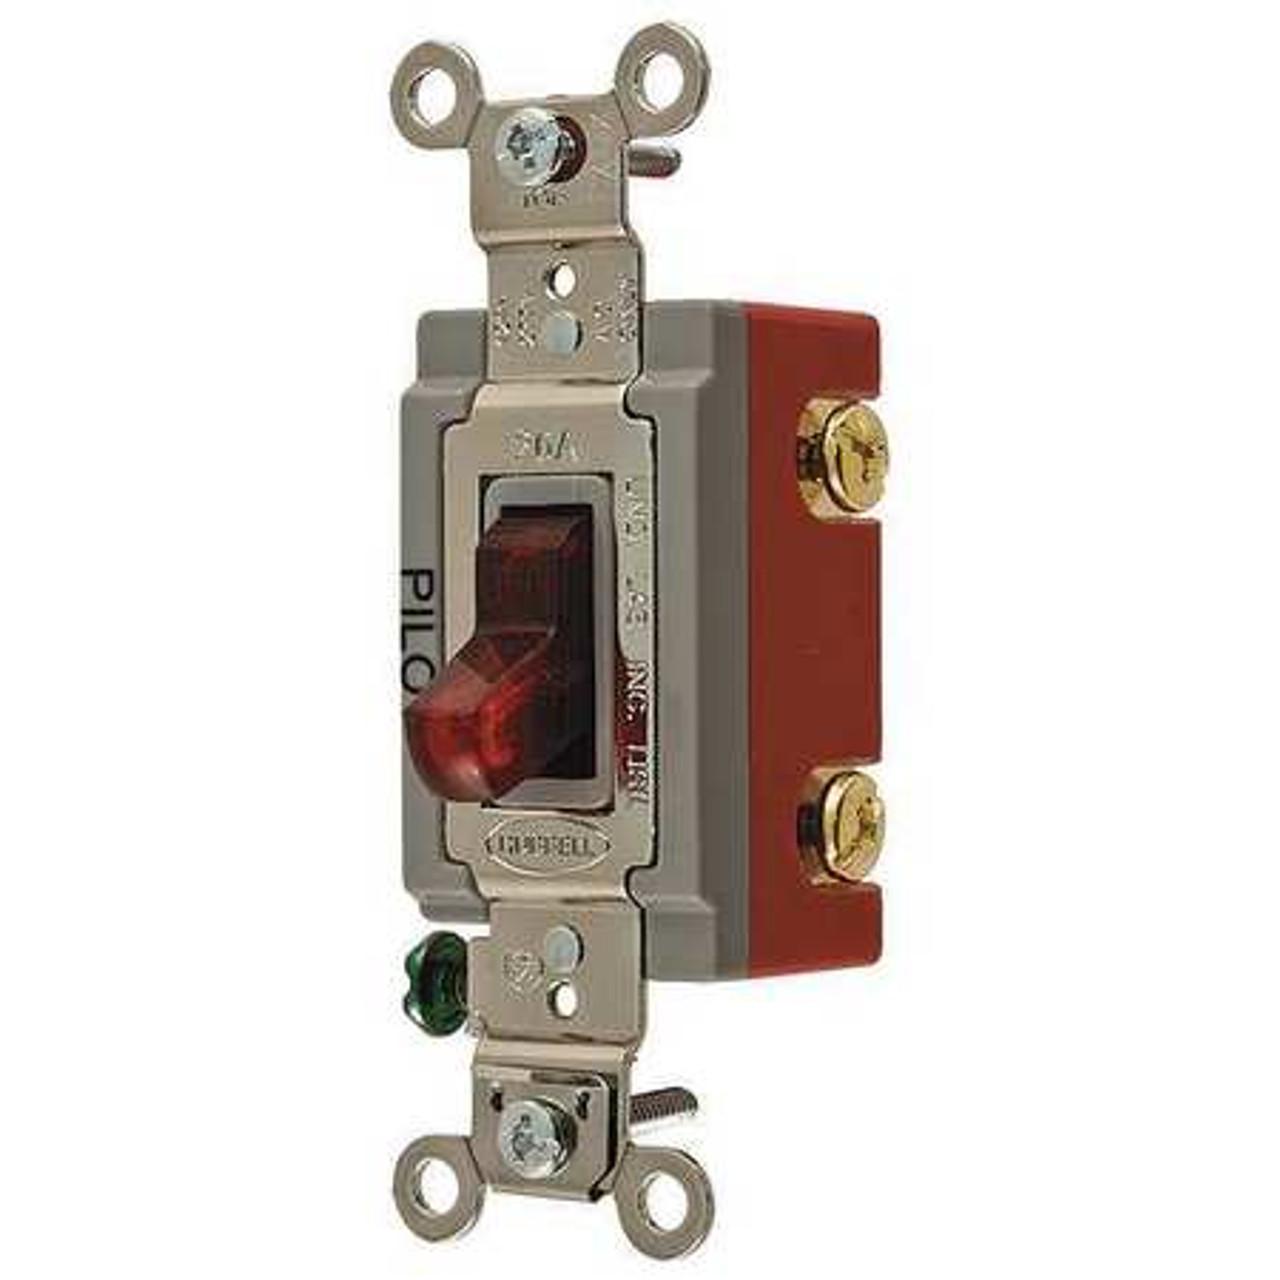 Hubbell HBL1223PL Switches and Lighting Controls, Industrial Grade, Pilot Light Toggle Switches, General Purpose AC, Three Way, 20A 120/277V AC, Back and Side Wired, Red Toggle  ; Large brass binding head screws with deep slots ; Abuse resistant nylon toggle ; Strip gauge 